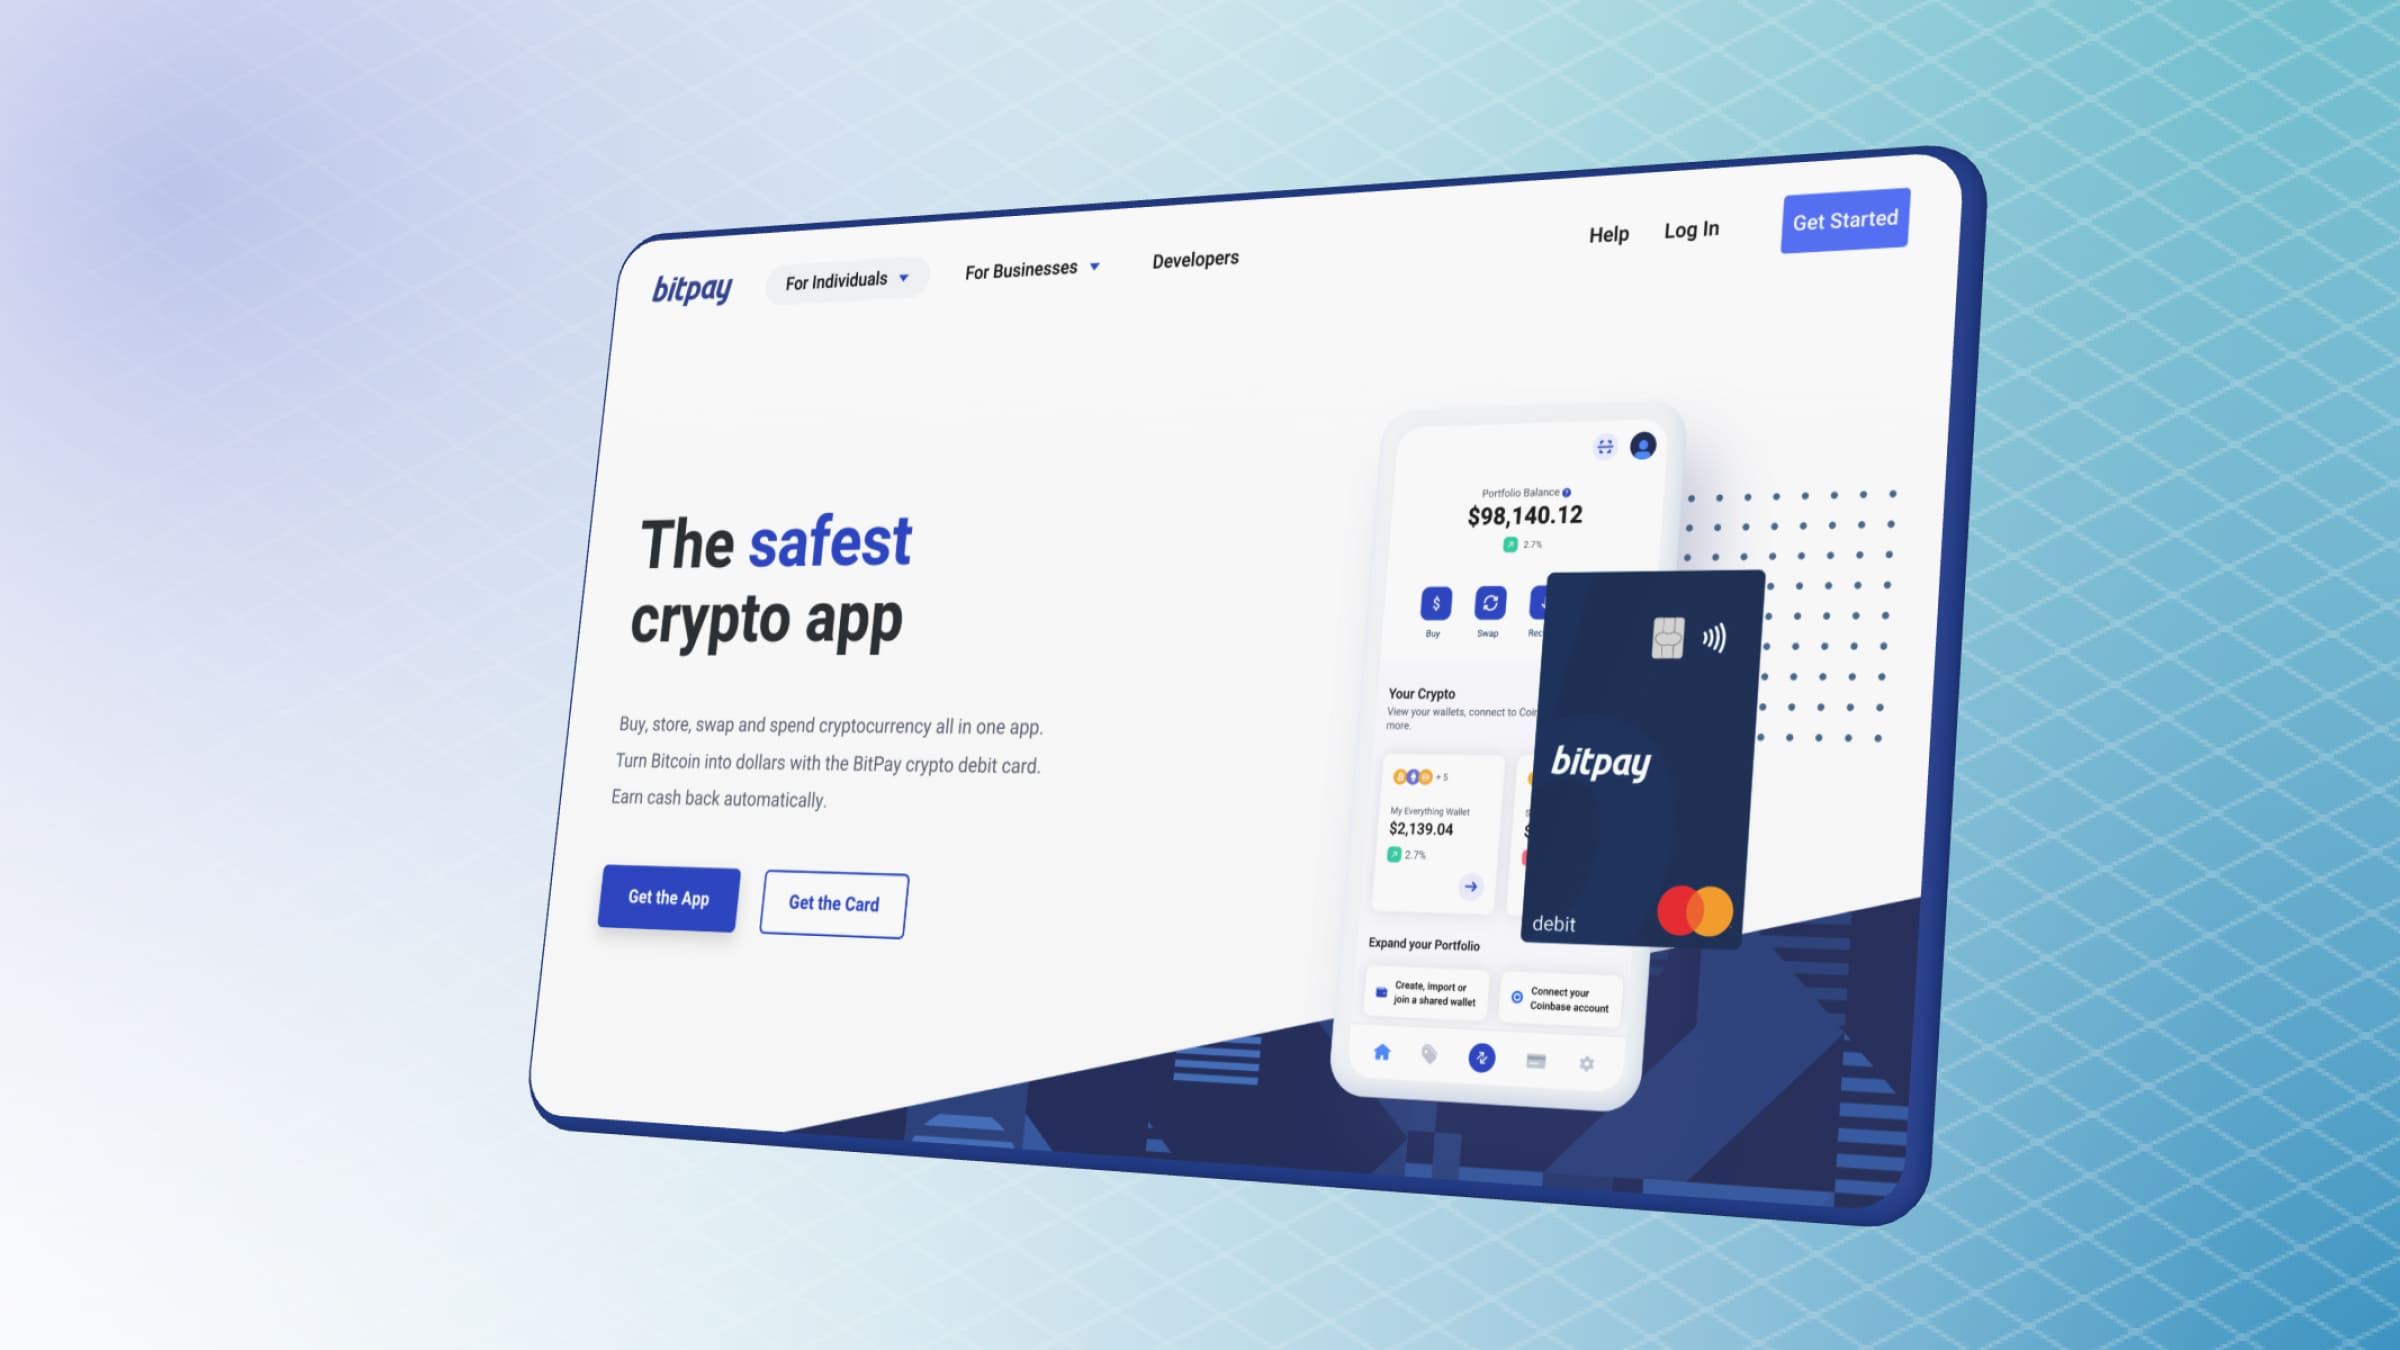 BitPay was originally launched as a cryptocurrency wallet.